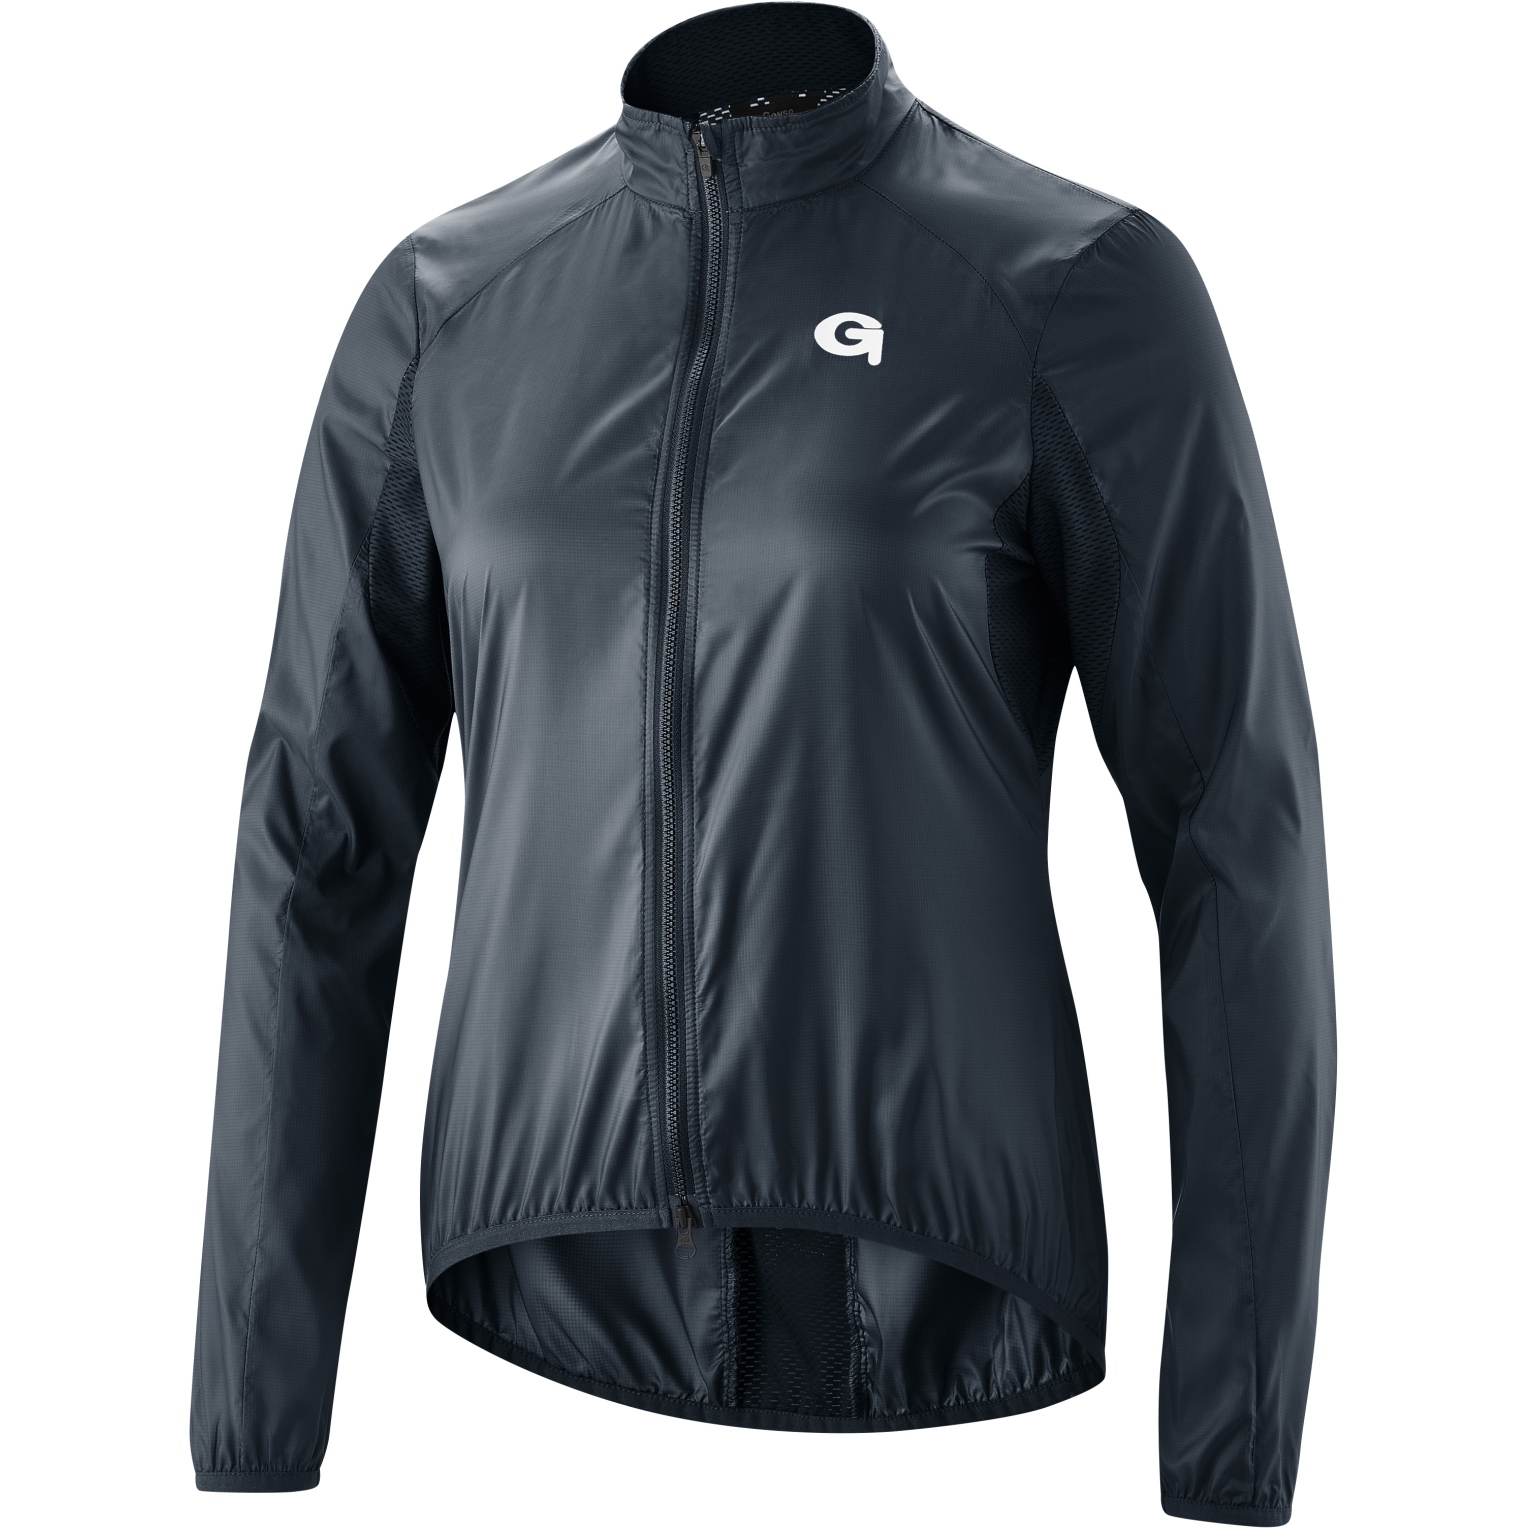 Productfoto van Gonso Porlezza Windbreaker Dames - Outerspace